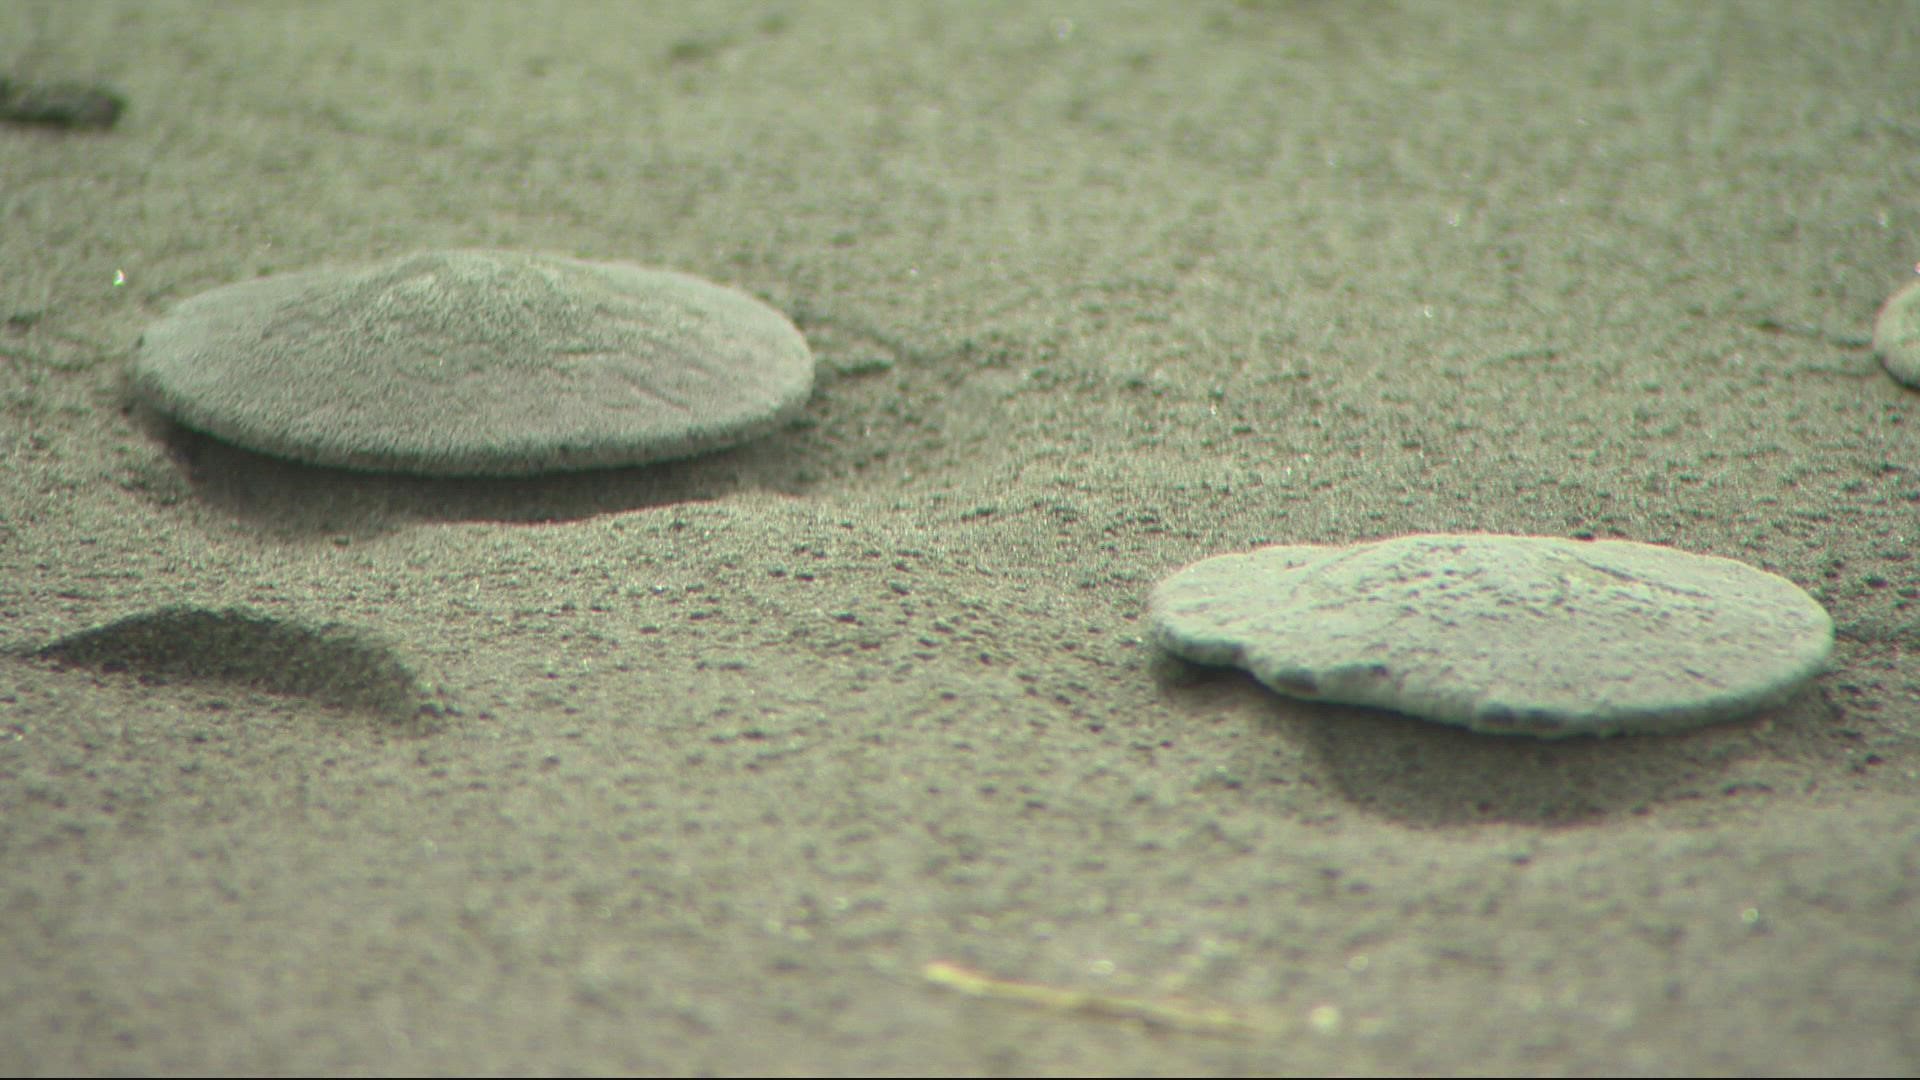 Thousands of sand dollars washed up on the beach in Seaside during a recent tidal event. Devon Haskins spoke to some of the people collecting them.